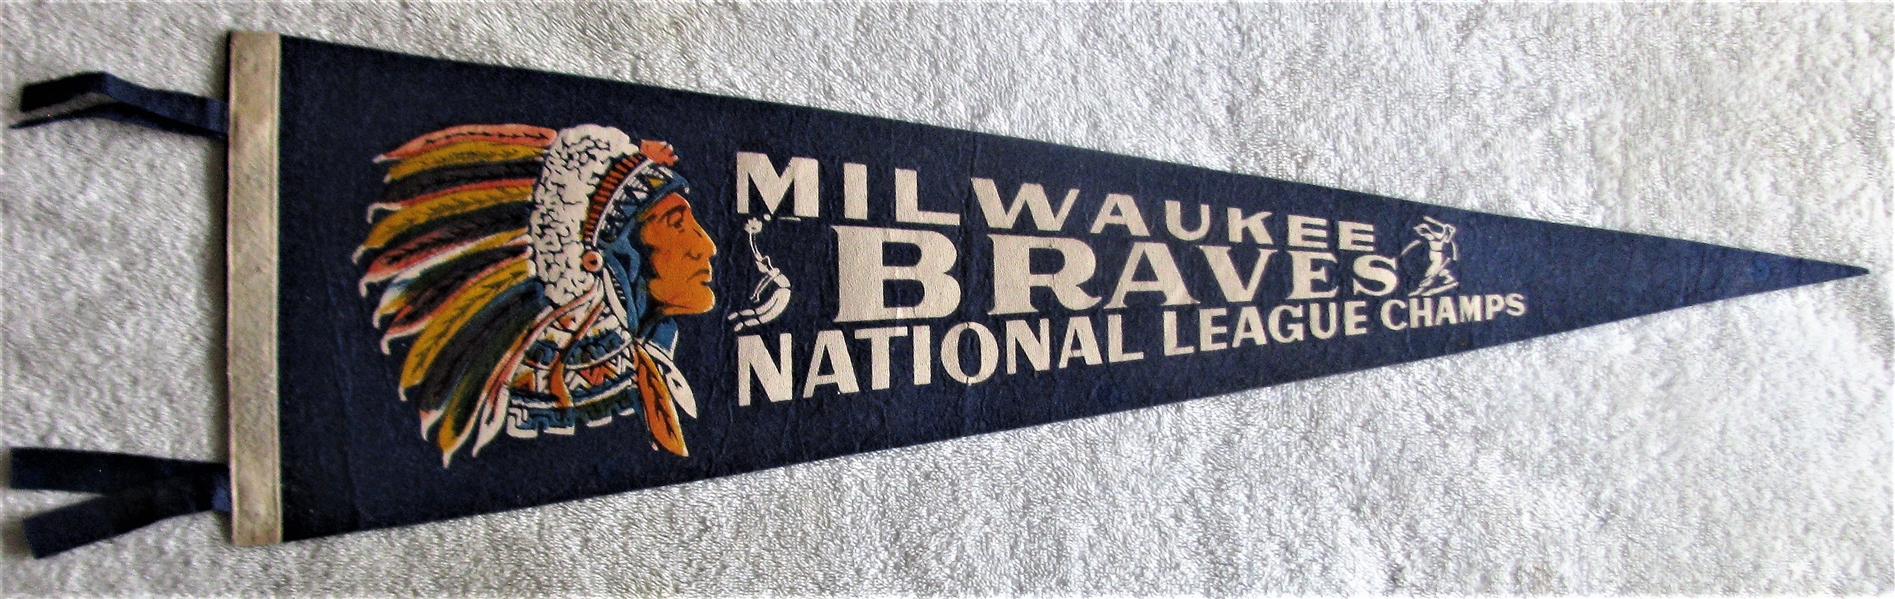 50's MILWAUKEE BRAVES NATIONAL LEAGUE CHAMPIONS PENNANT